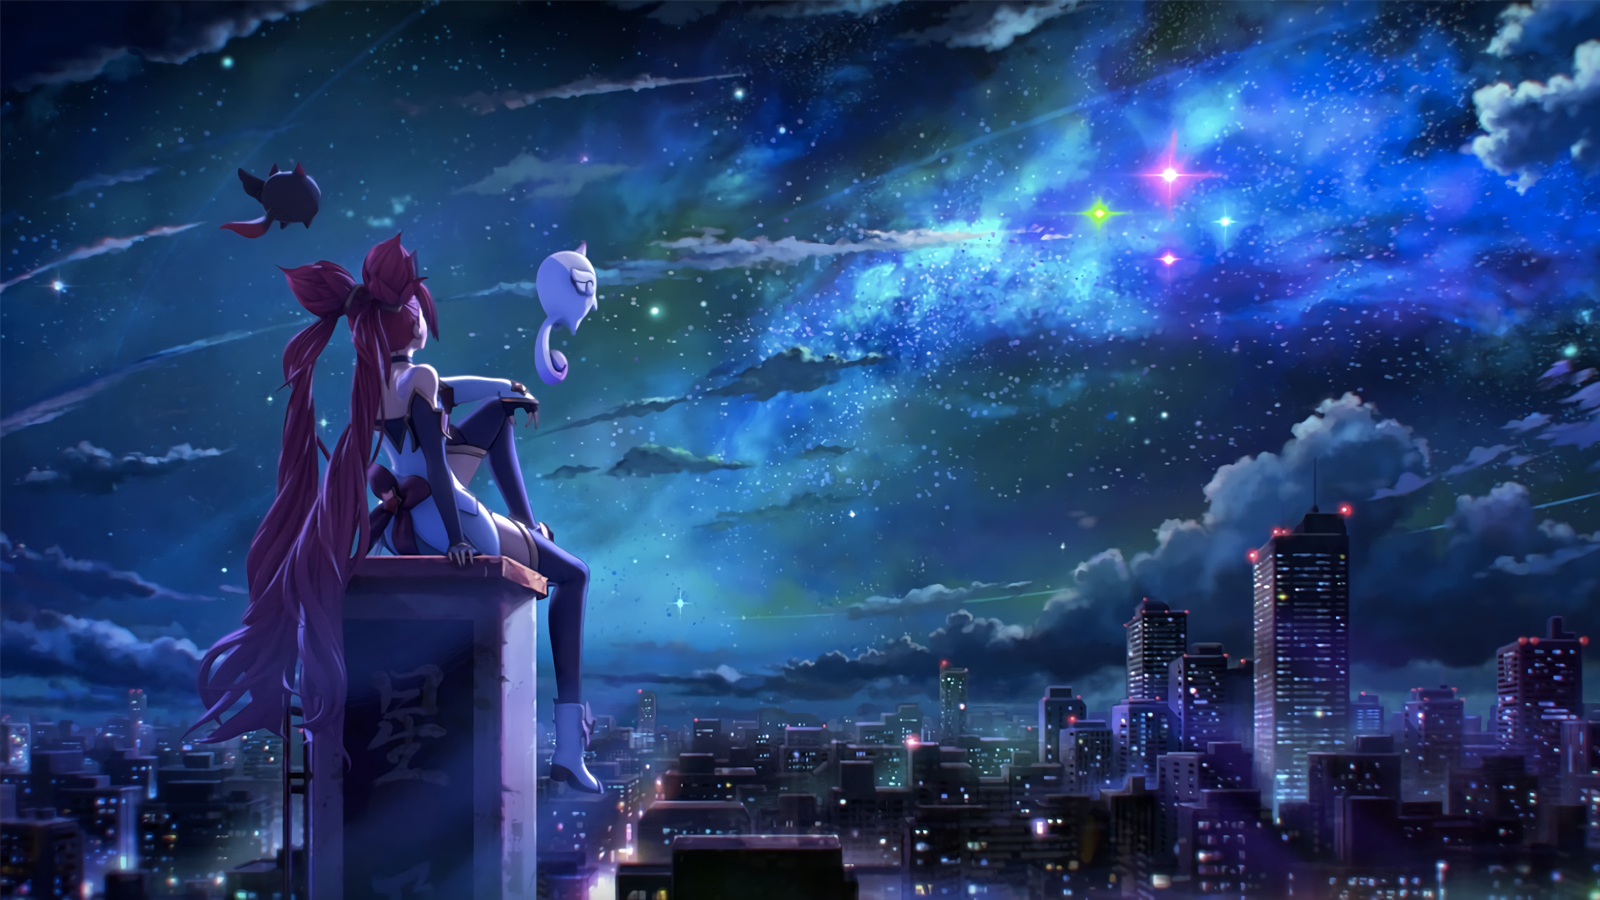 League Of Legends Night PC Gaming Anime Girls Anime Sky Cityscape Wallpaper:1600x900